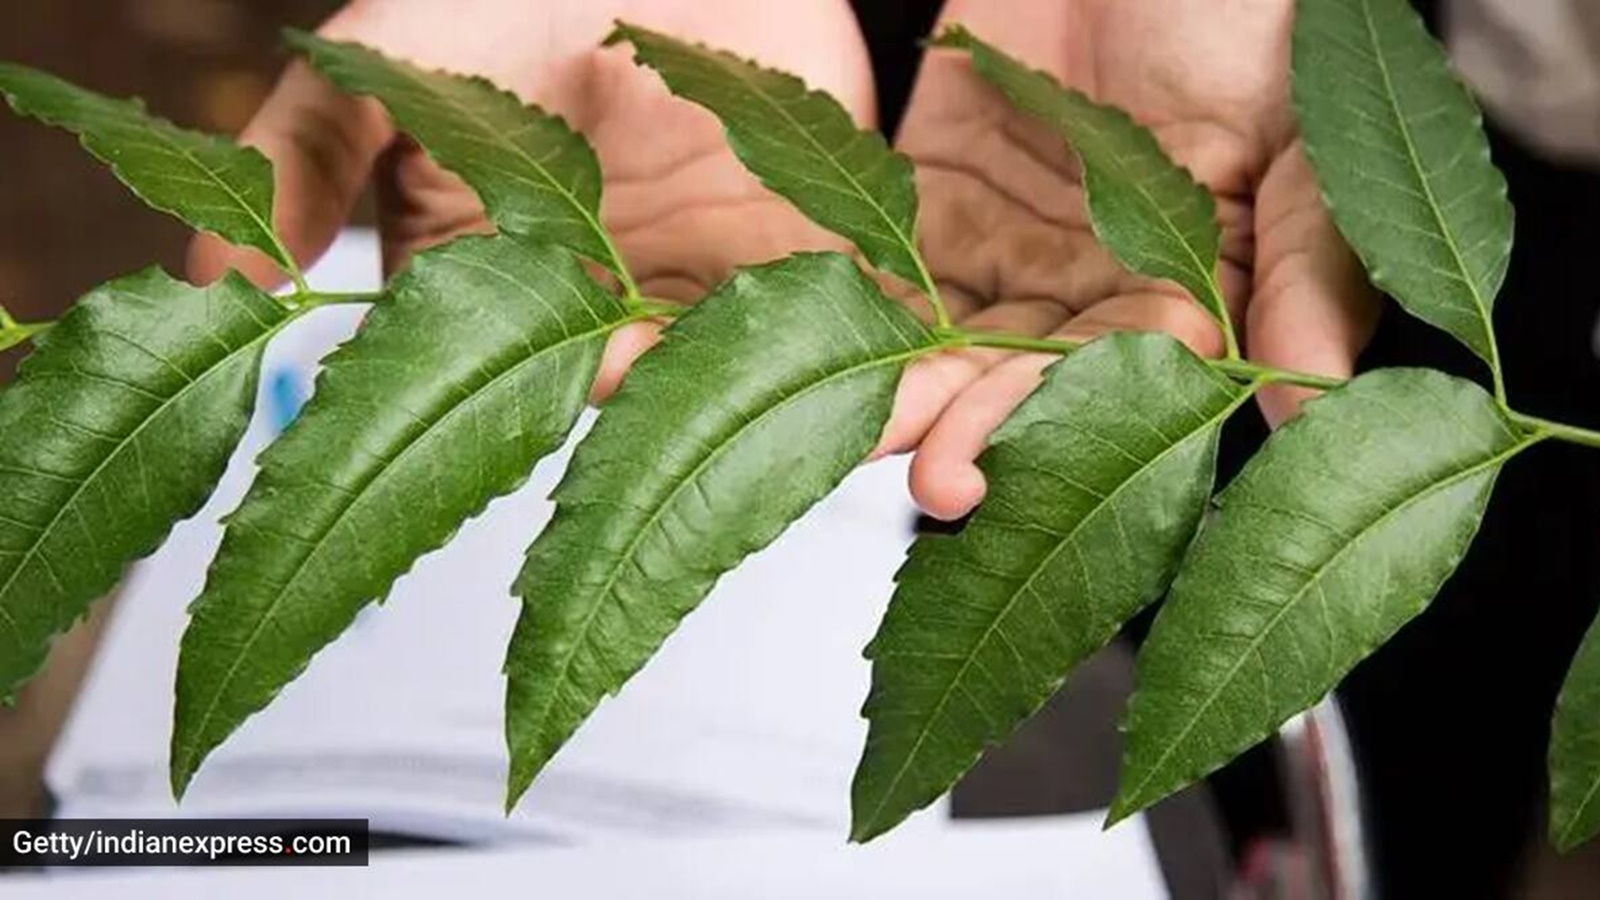 android, nutrition alert: here’s what a 100-gram serving of neem contains